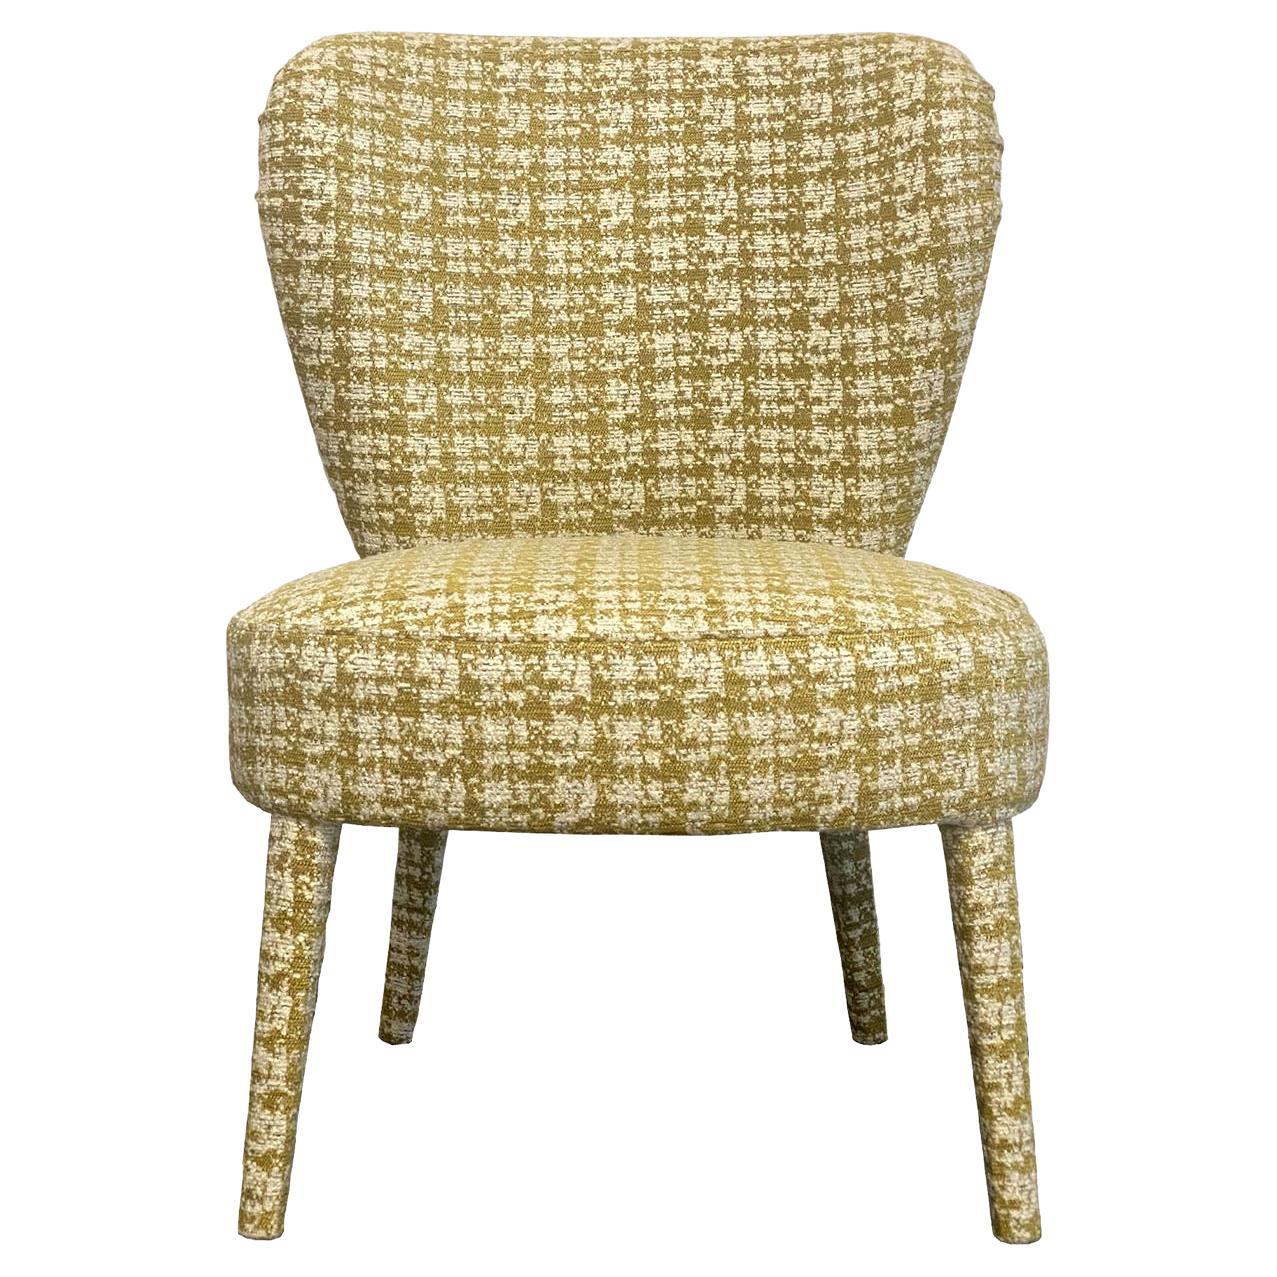 Cloe' Pattern Upholstered Lounge Chair For Sale